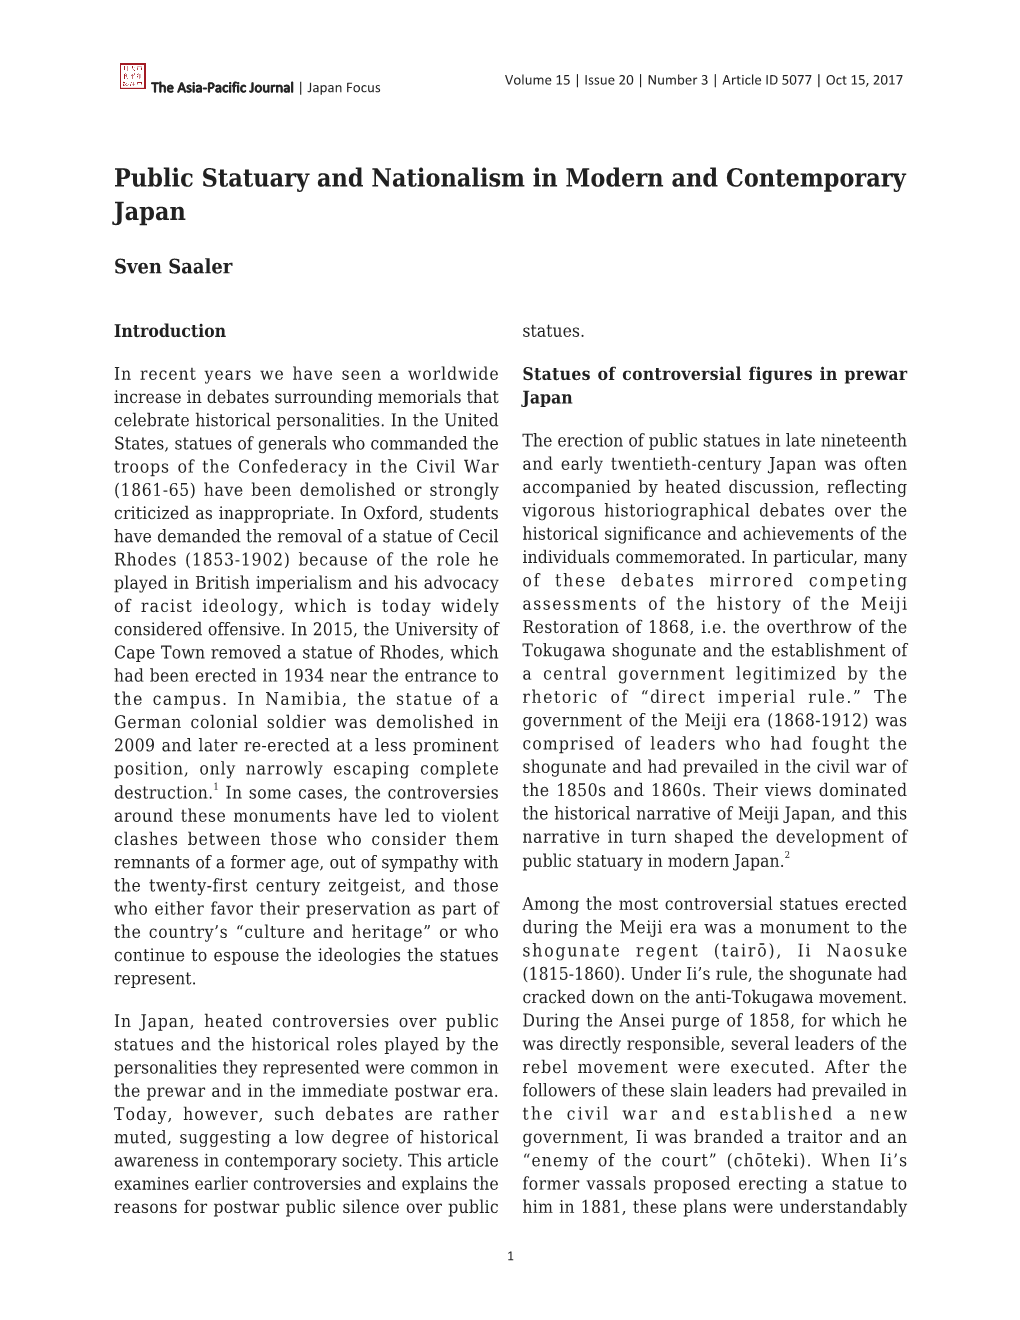 Public Statuary and Nationalism in Modern and Contemporary Japan